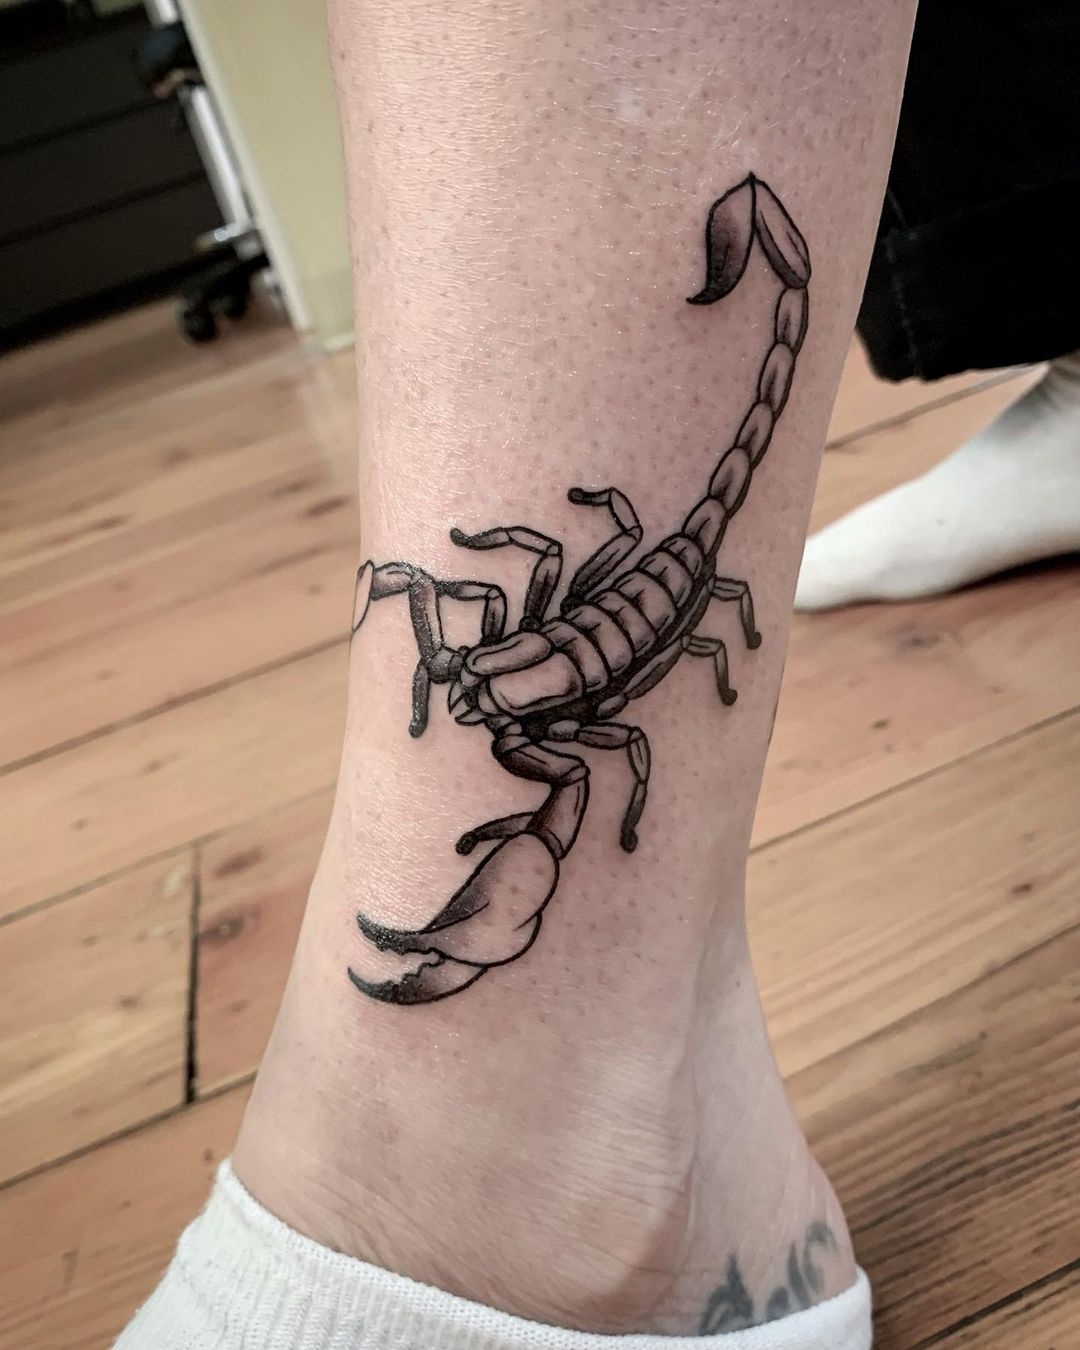 The Mans Leg with a Tattoo of a Scorpion Stock Photo  Image of person  cancer 149632014